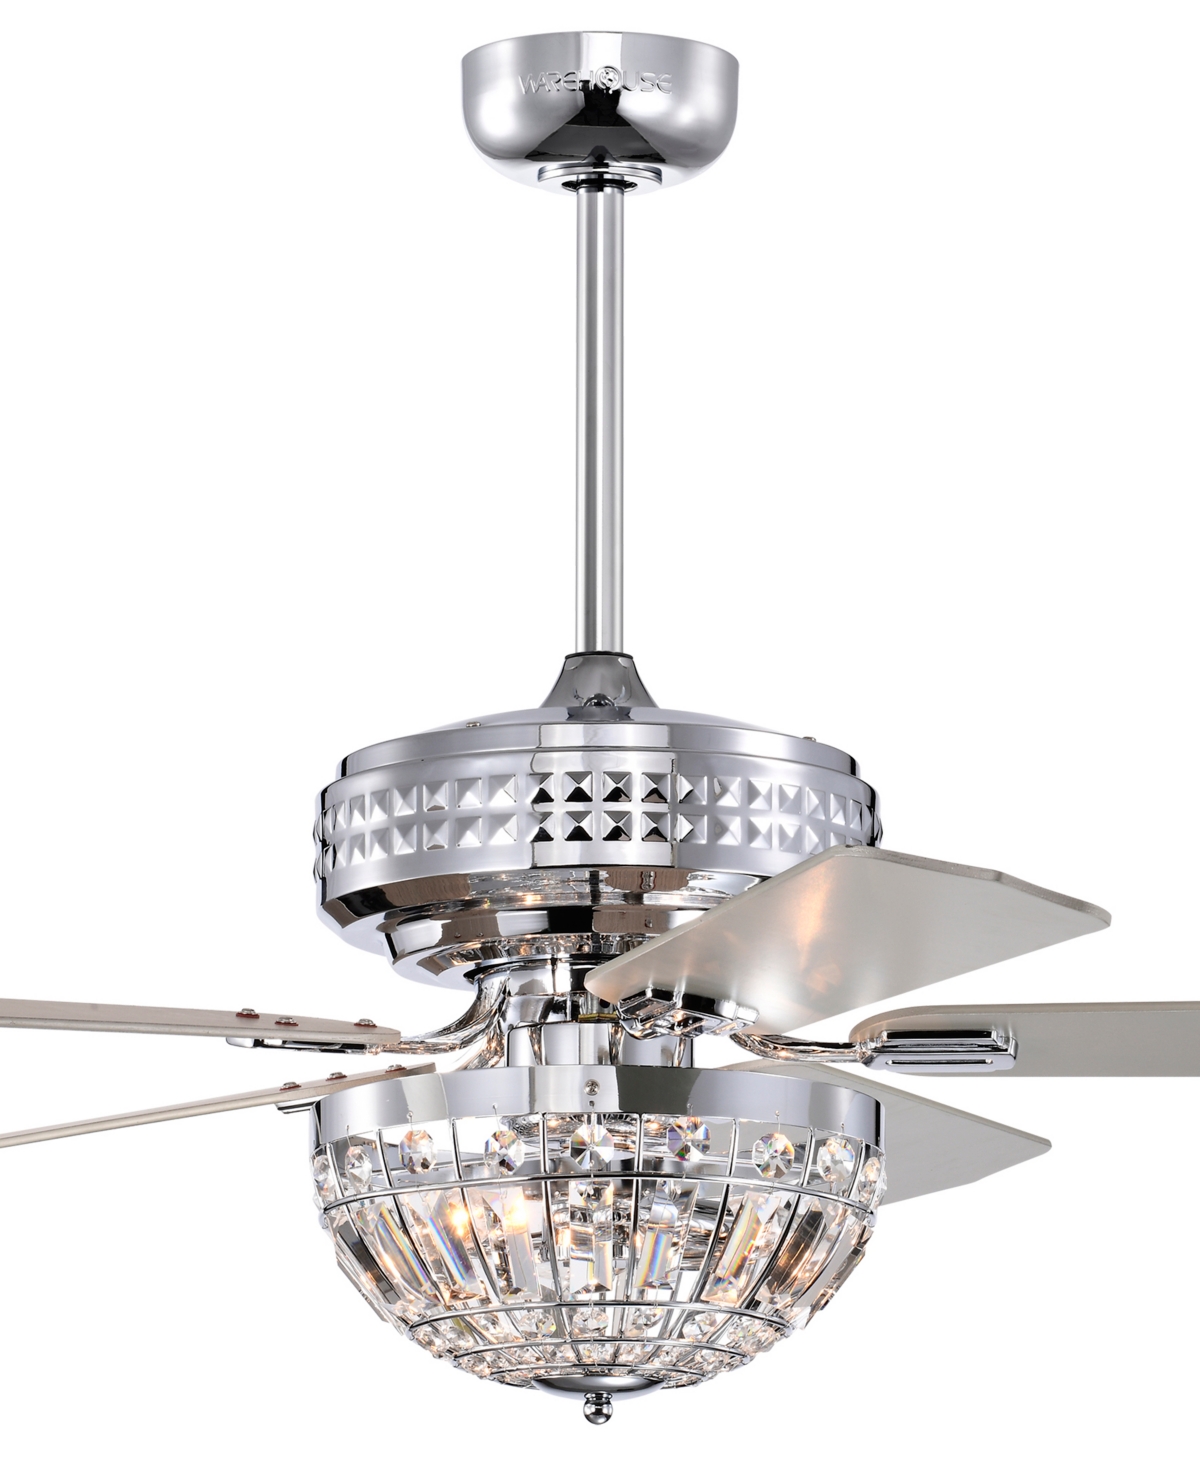 Home Accessories Alora 52" 3-light Indoor Ceiling Fan With Light Kit In Polished Chrome